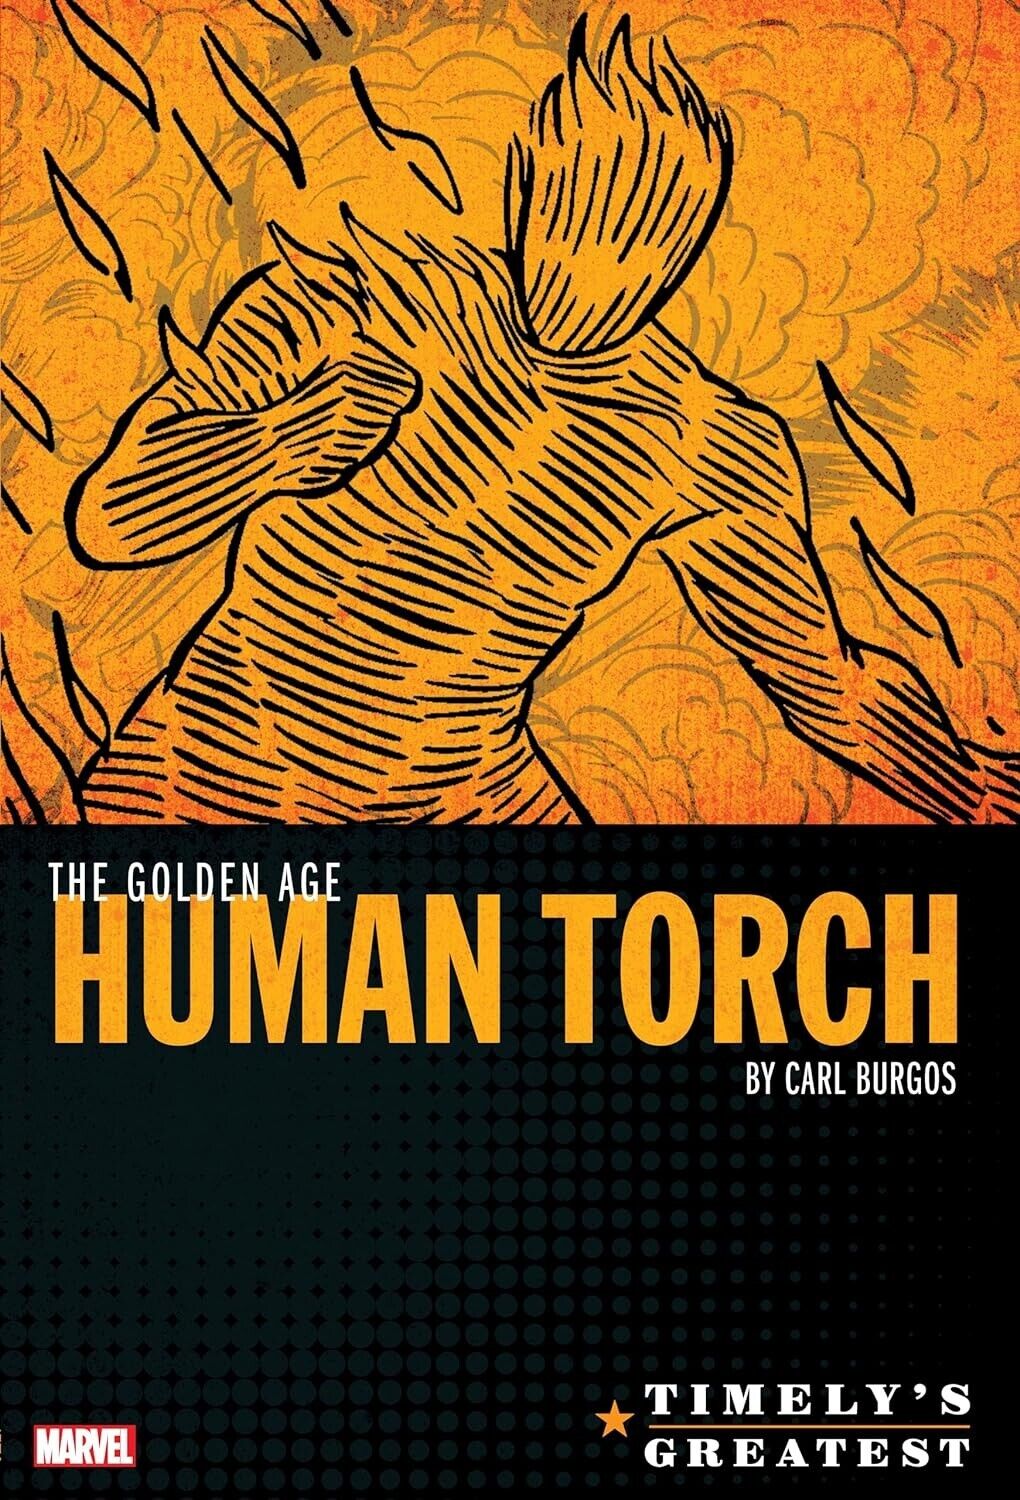 TIMELYS GREATEST THE GOLDEN AGE HUMAN TORCH OMNIBUS (Hardcover) Marvel Comics